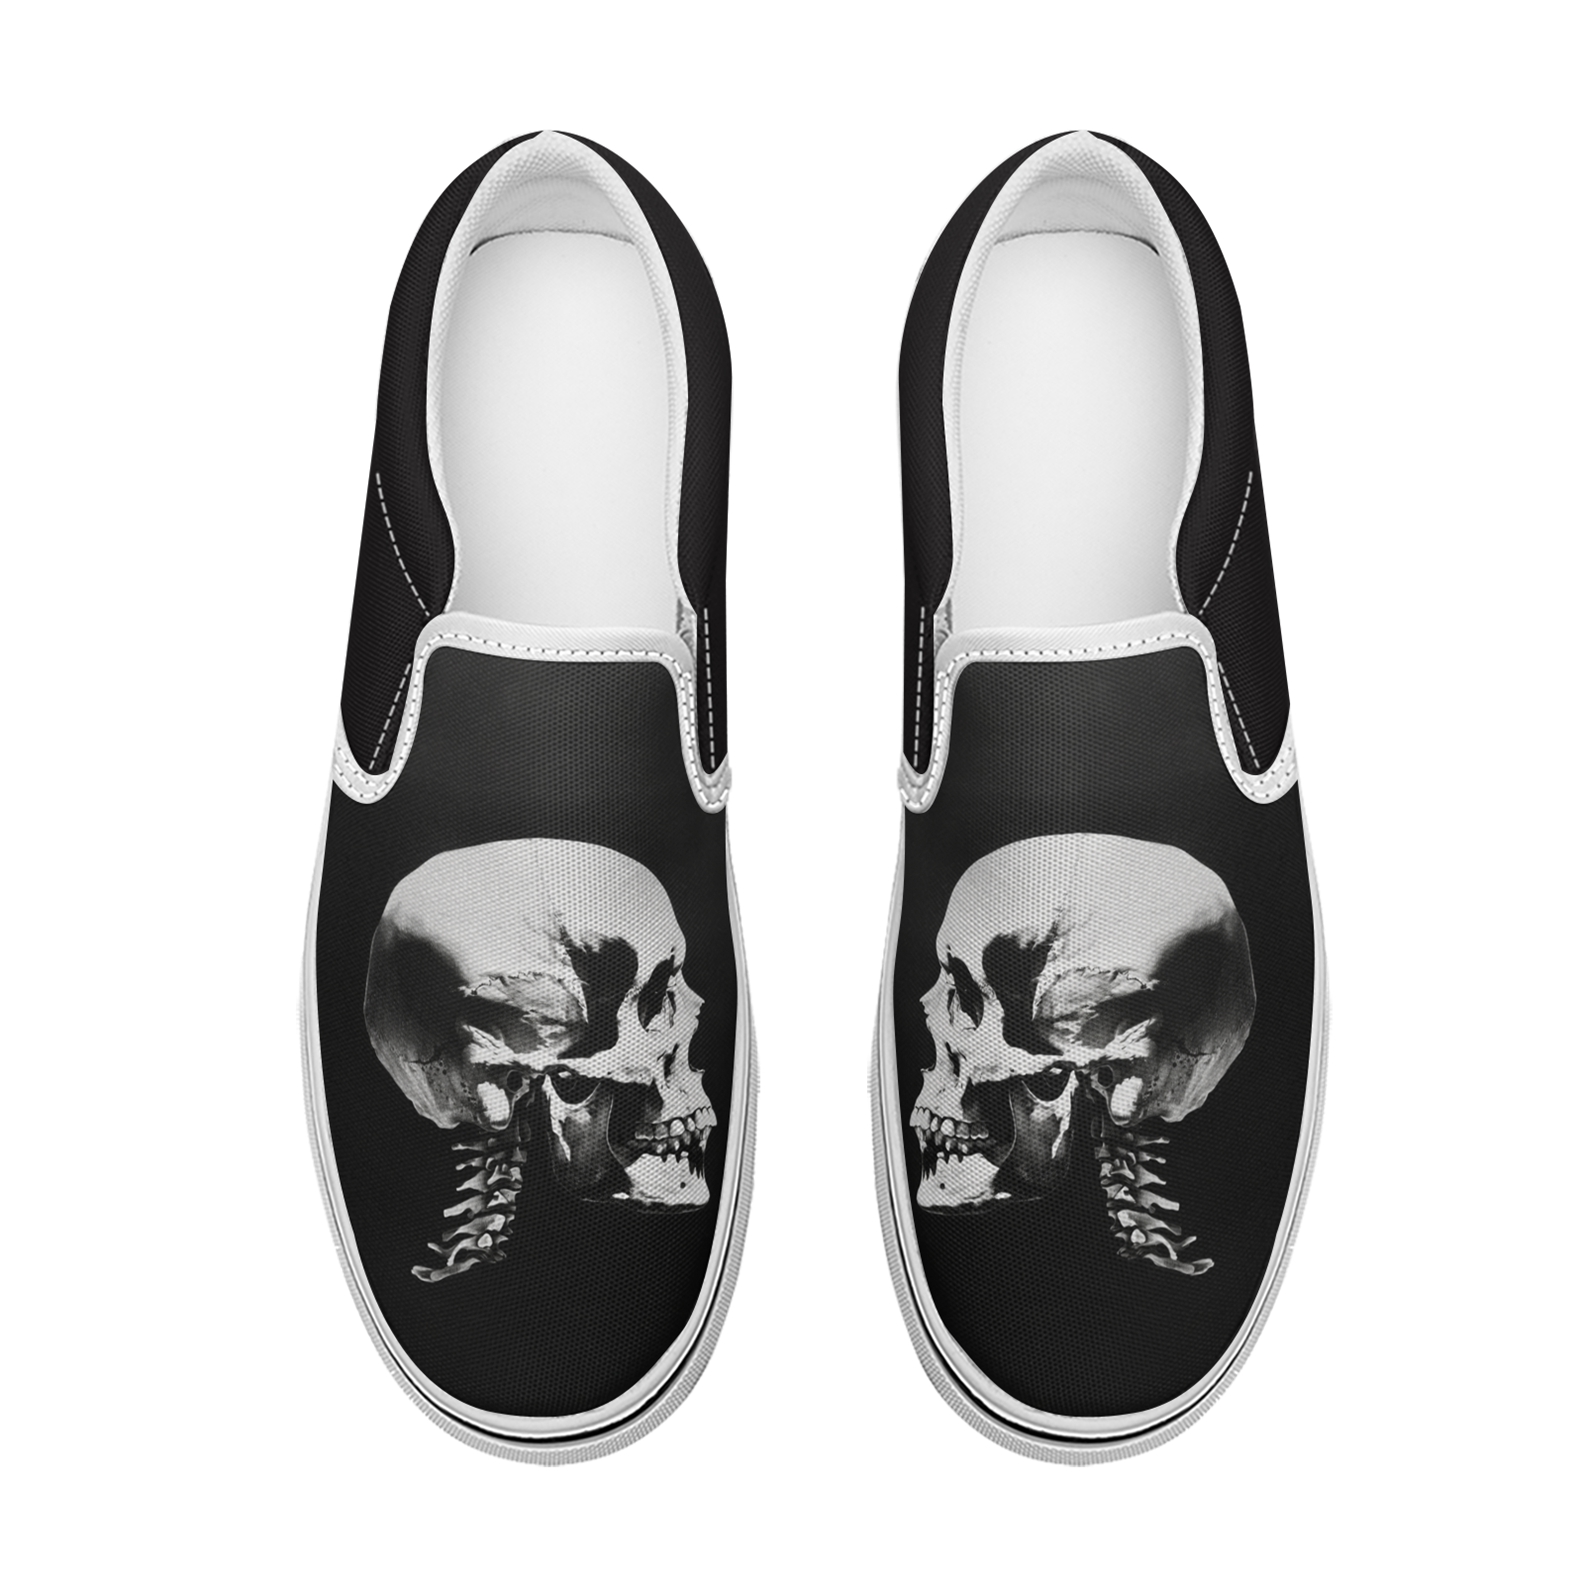 Men's fashion skeleton pattern print canvas sneakers low-top casual walking shoes classic comfortable flat fashion sneakers